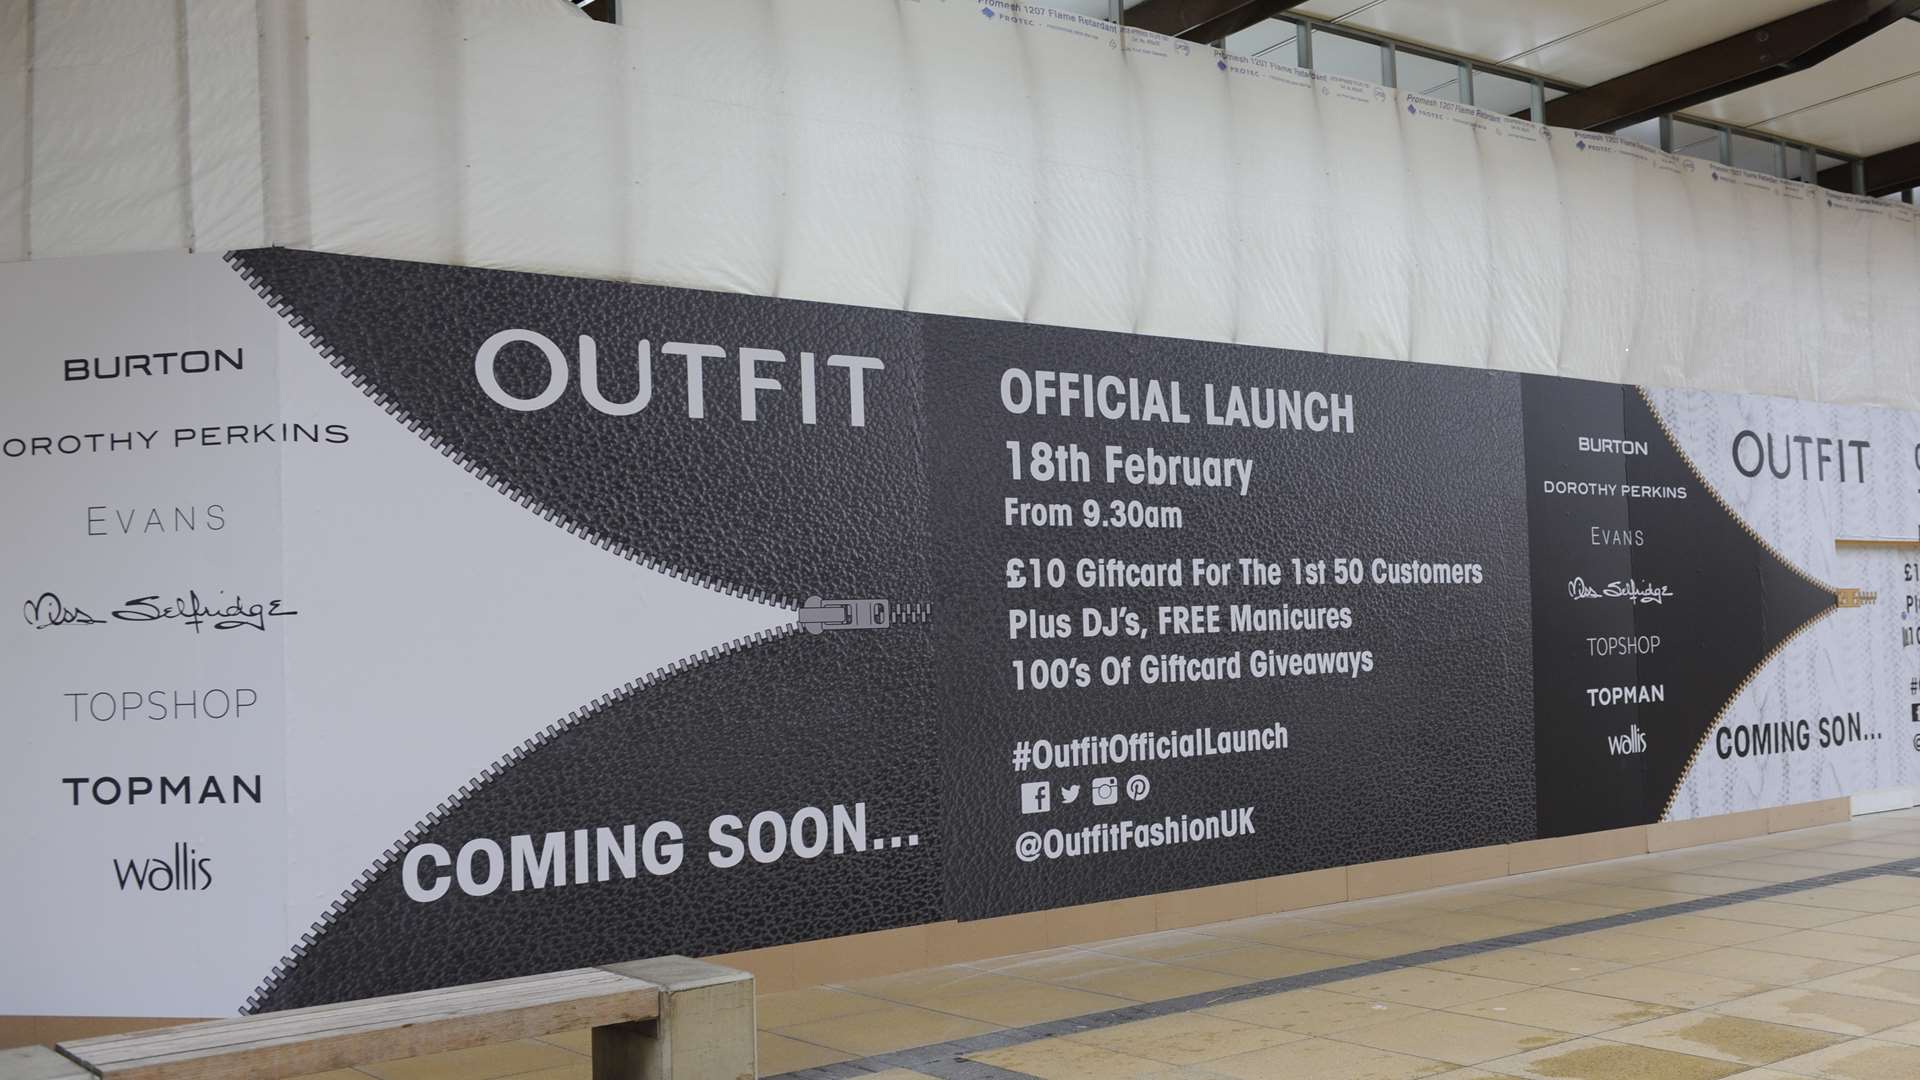 40 new jobs to be created when OUTFIT opens new store in Westwood Cross  Broadstairs